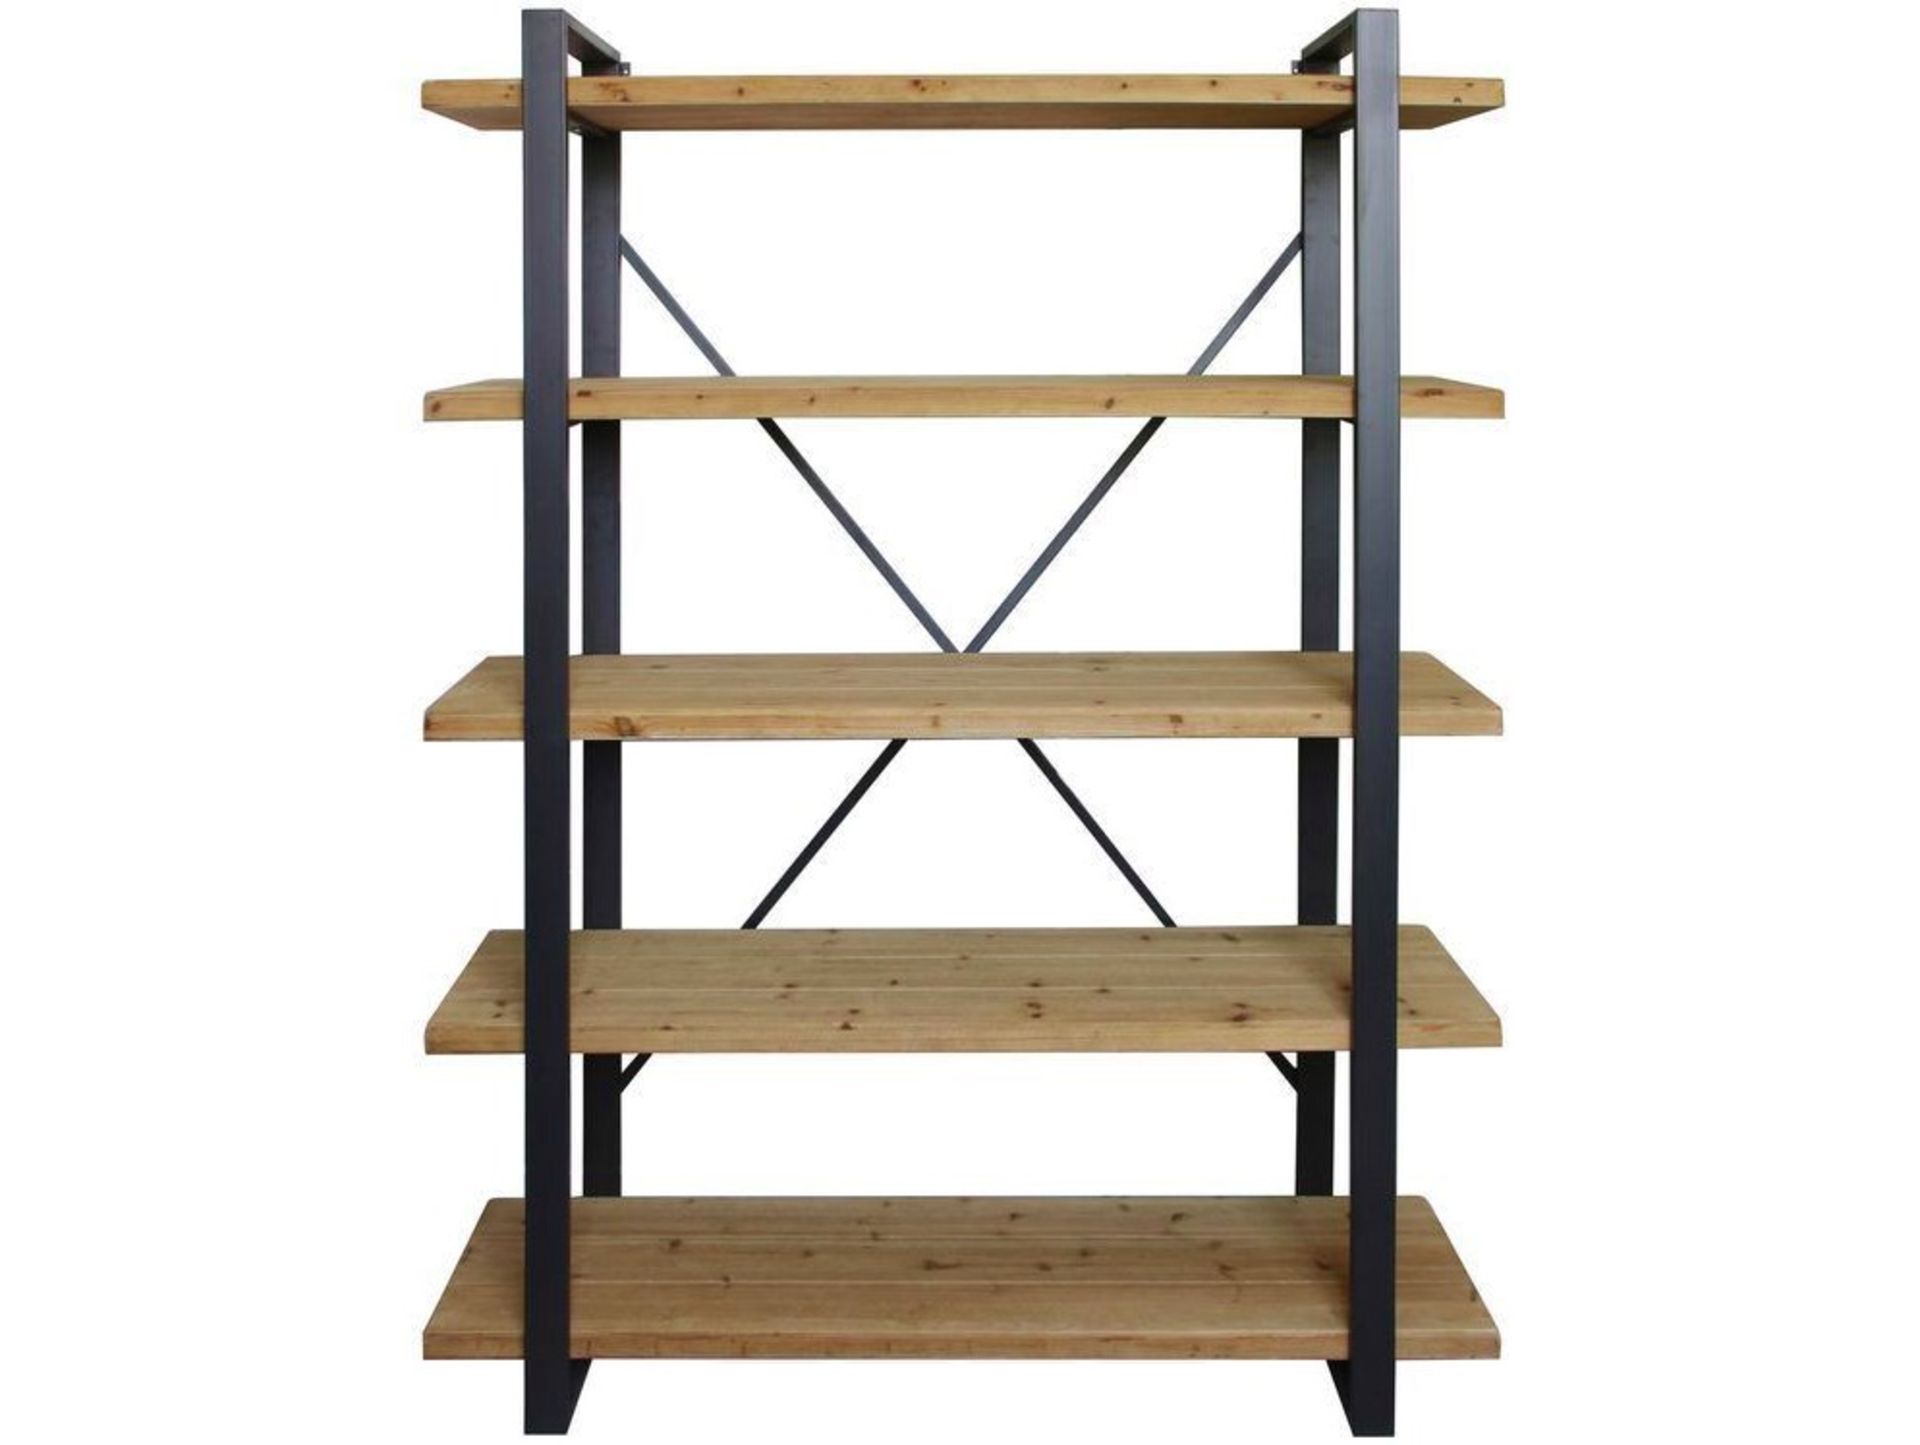 Kempsey Wood and Iron 5 Tier Shelving Unit Industrial chic is given a modern twist with this